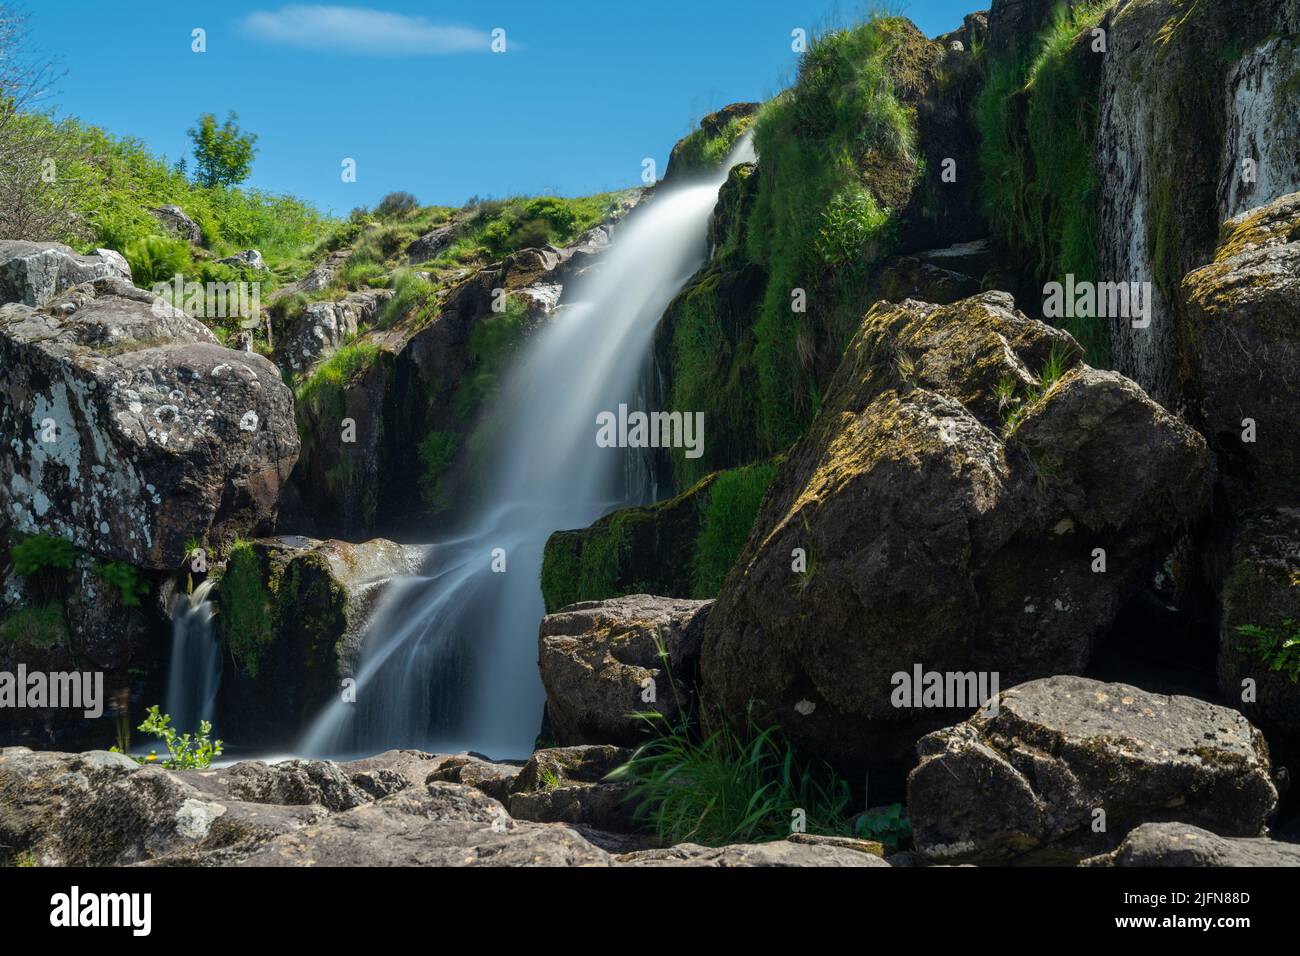 A view of the Upper Falls of the Loup of Fintry in the central lowlands of Scotland Stock Photo